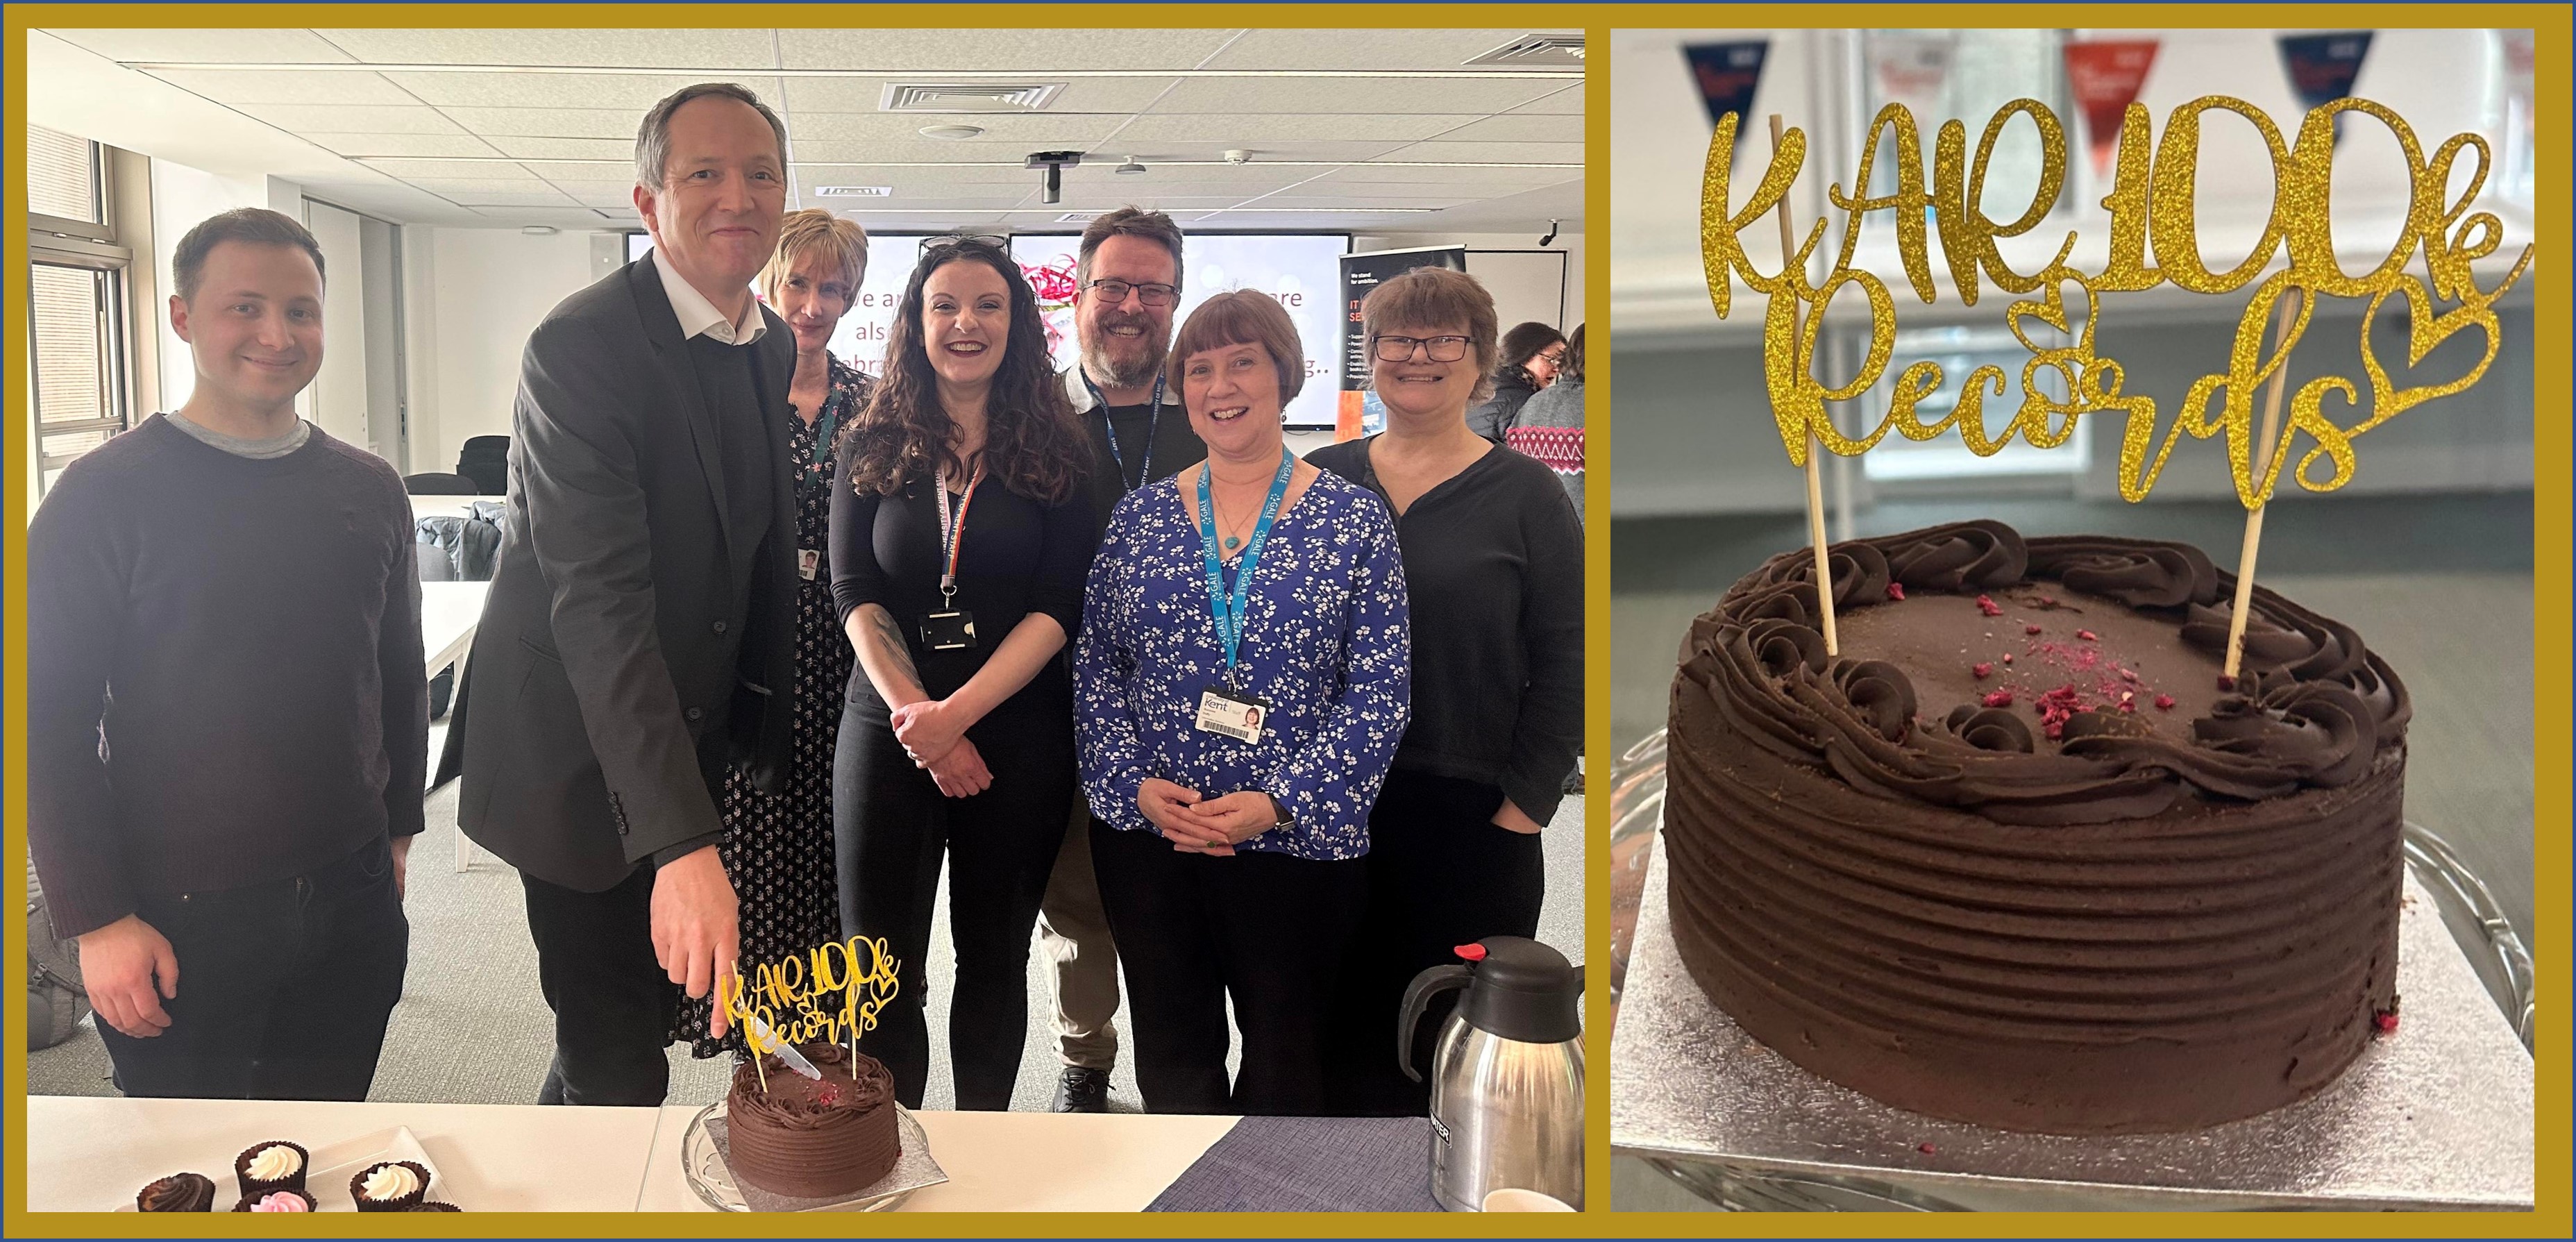 Two pictures. Left picture is a group of people gathered for a cake cutting. Right picture is a close up of the chocolate cake and the glitter gold cake topper, 'KAR 100K Records'